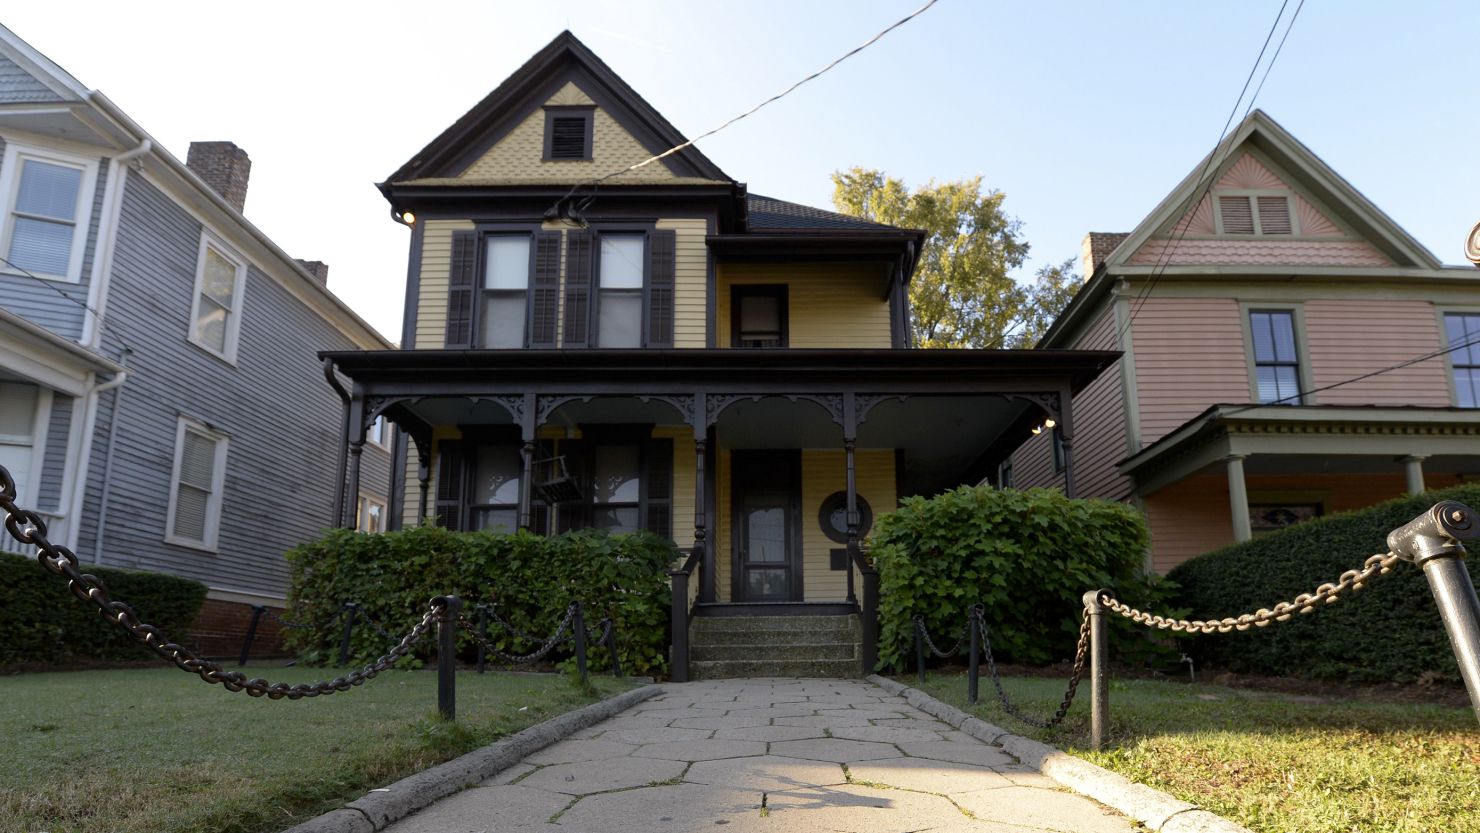 The birth home of Martin Luther King Jr, is seen along Auburn Avenue at the Martin Luther King Historic Site in Atlanta, Georgia, on October 1, 2013.